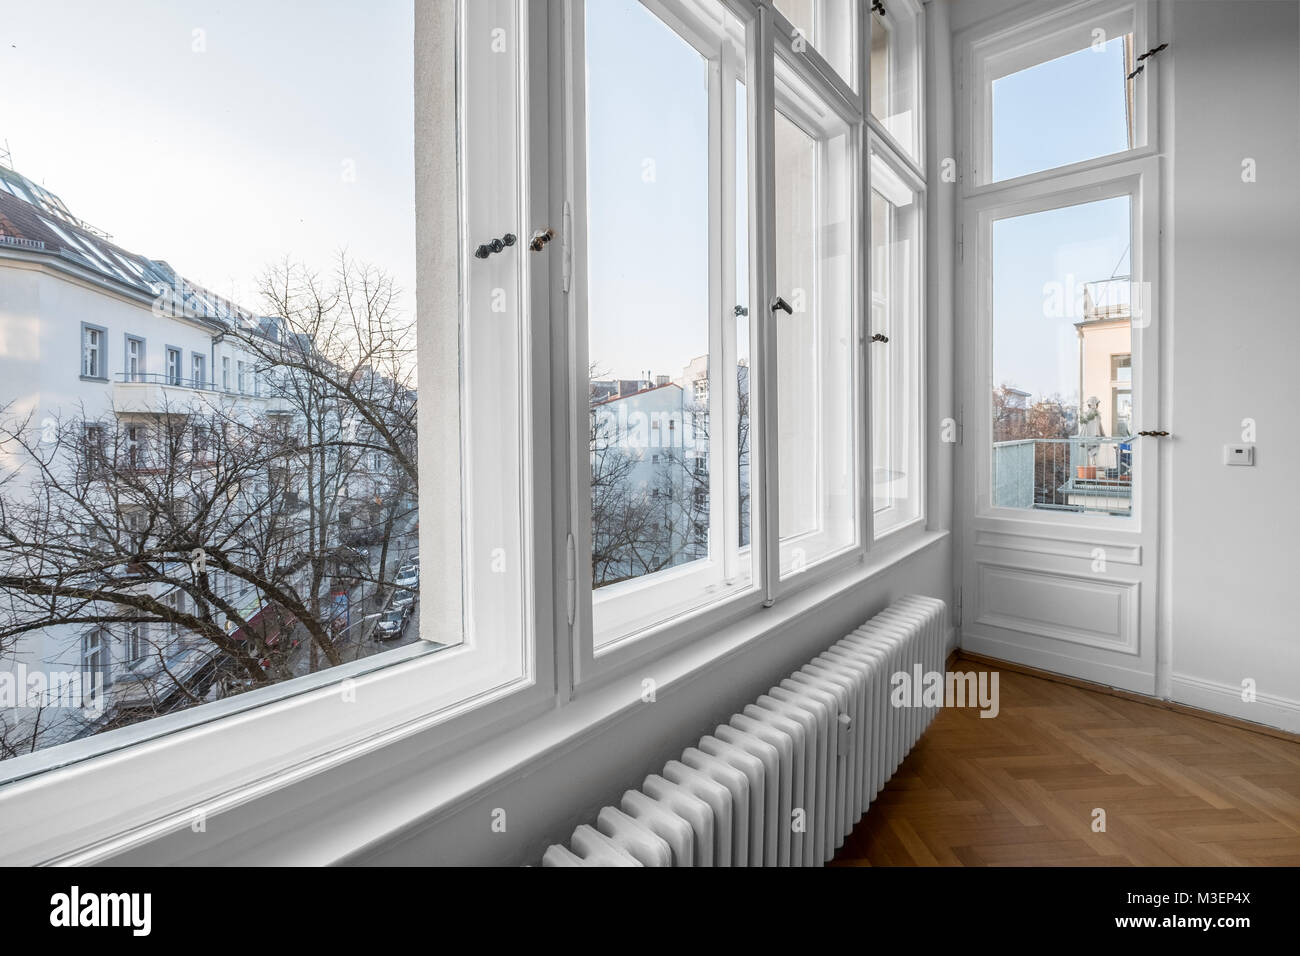 window, old wooden double windows in turn of the century building, Stock Photo